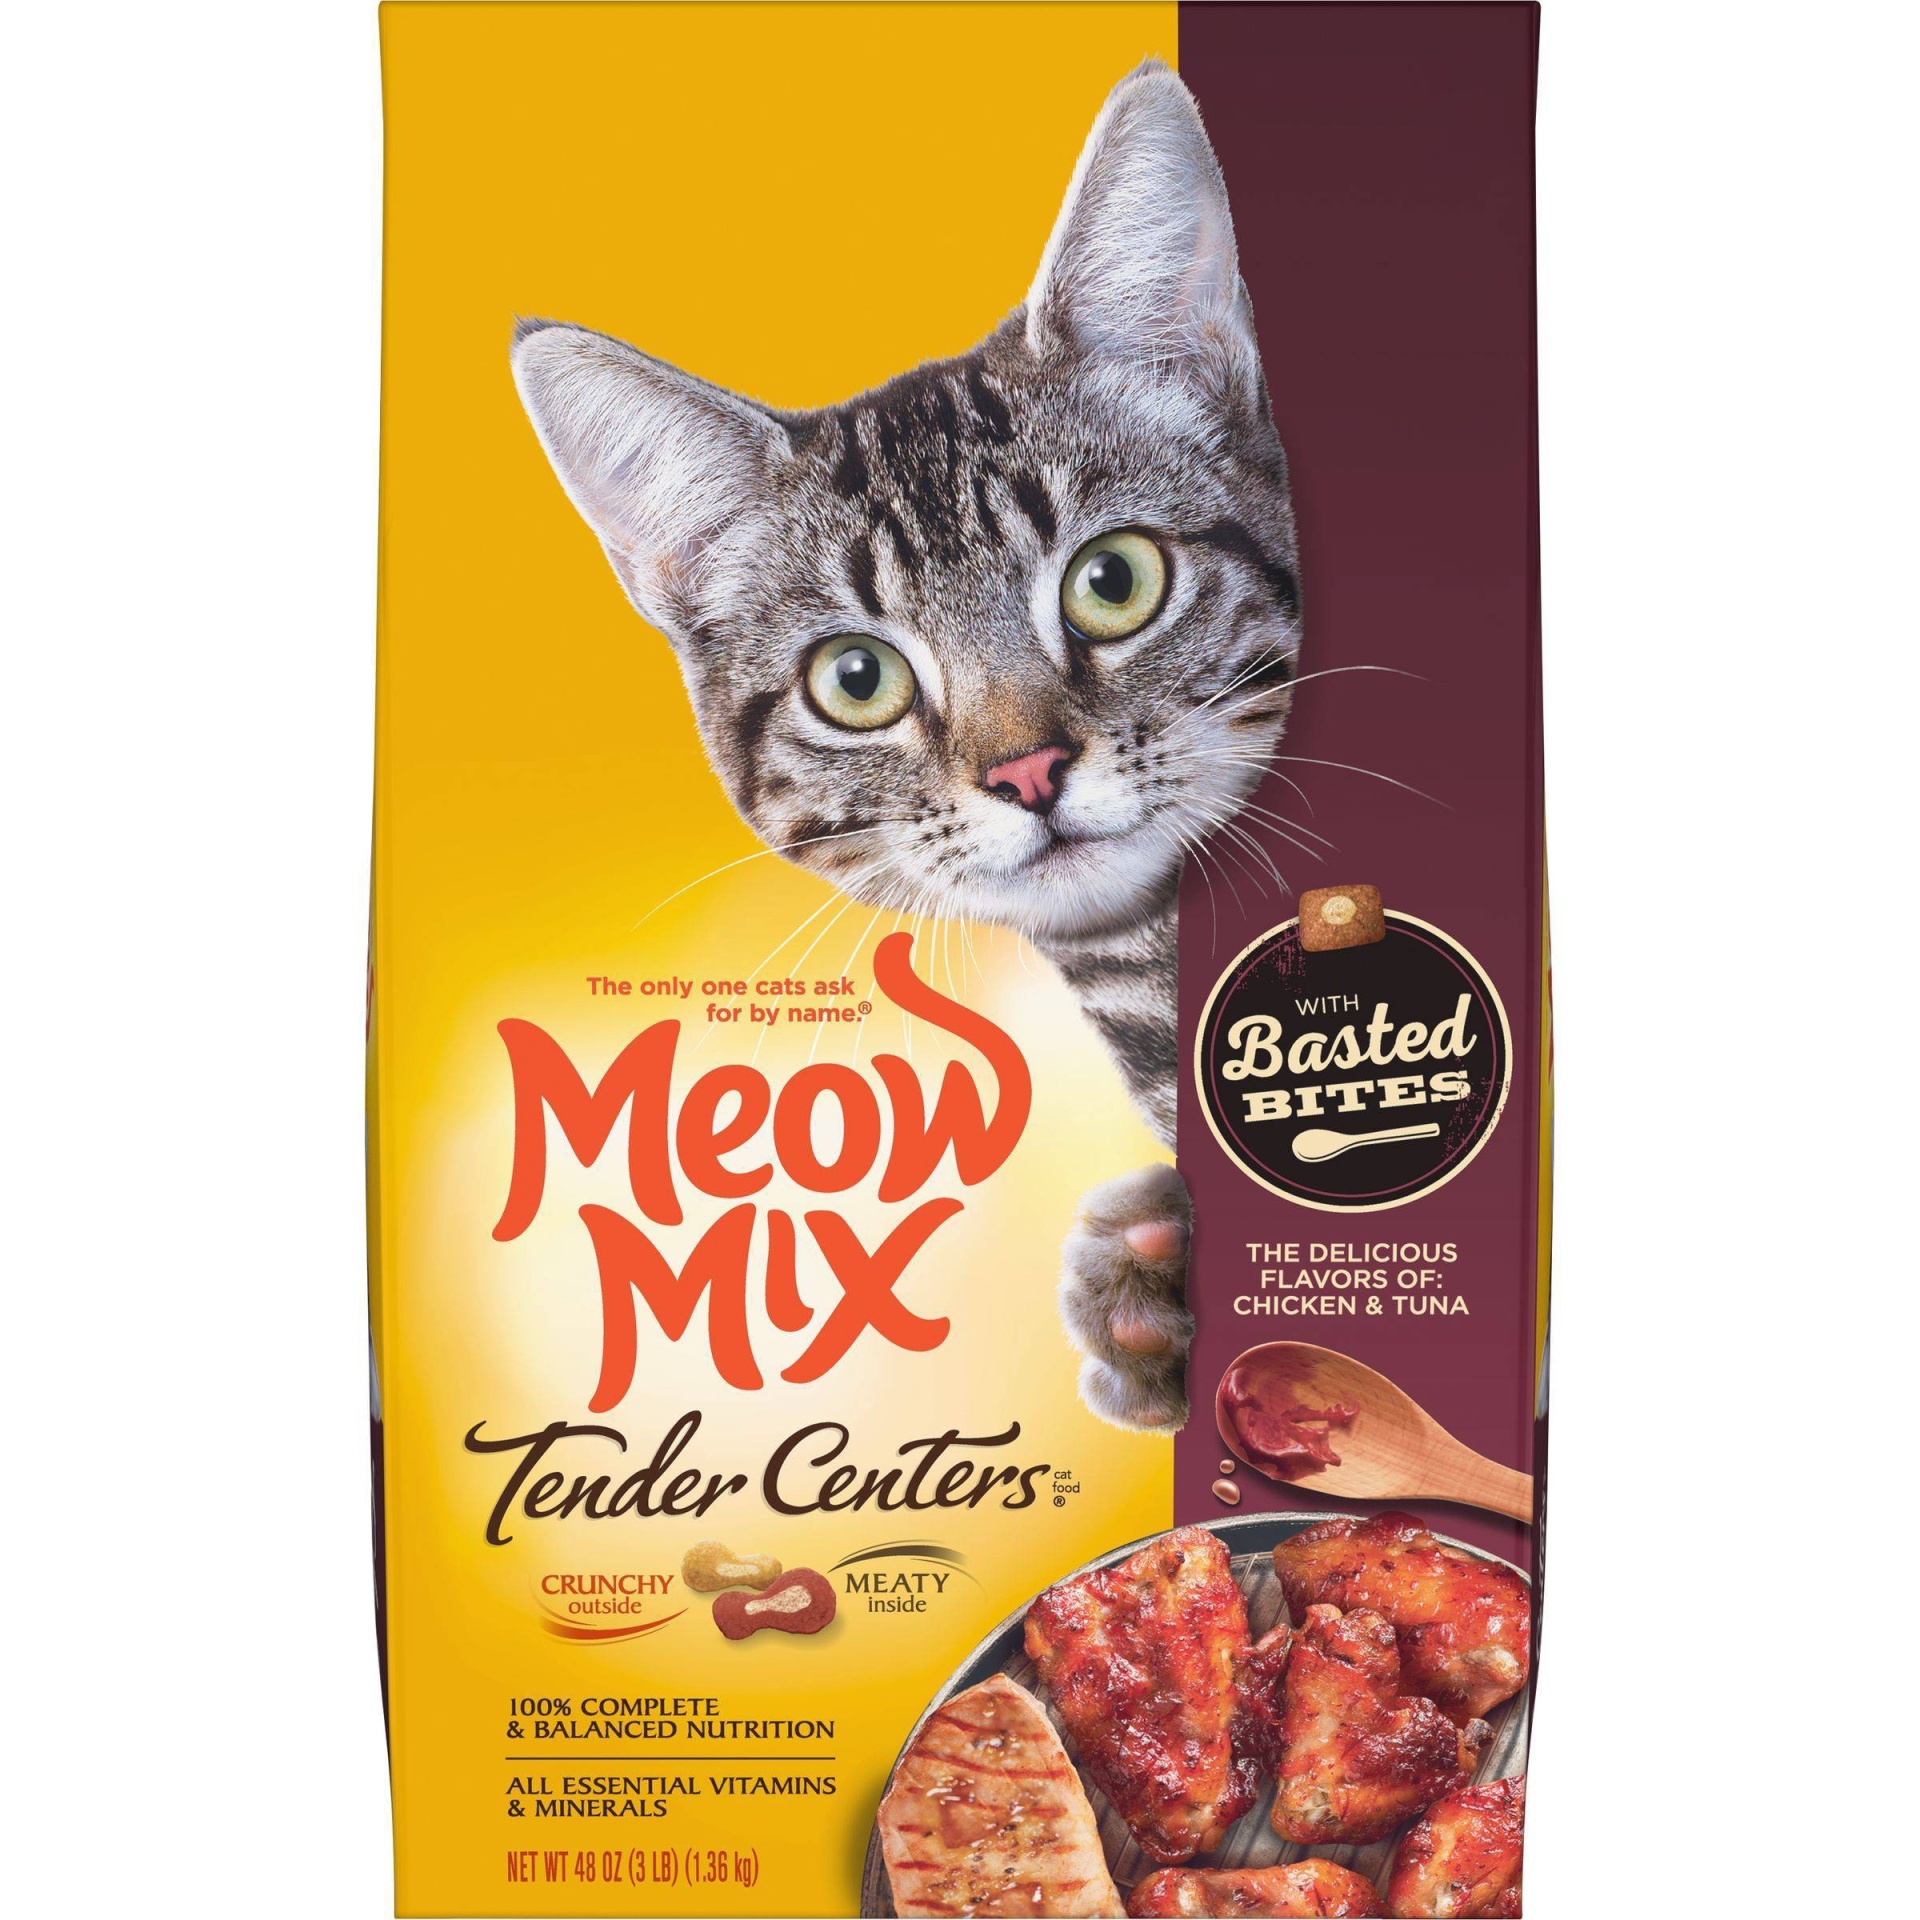 slide 1 of 8, Meow Mix Tender Centers with Basted Bites with Flavors of Chicken & Tuna Adult Complete & Balanced Dry Cat Food - 3lbs, 3 lb